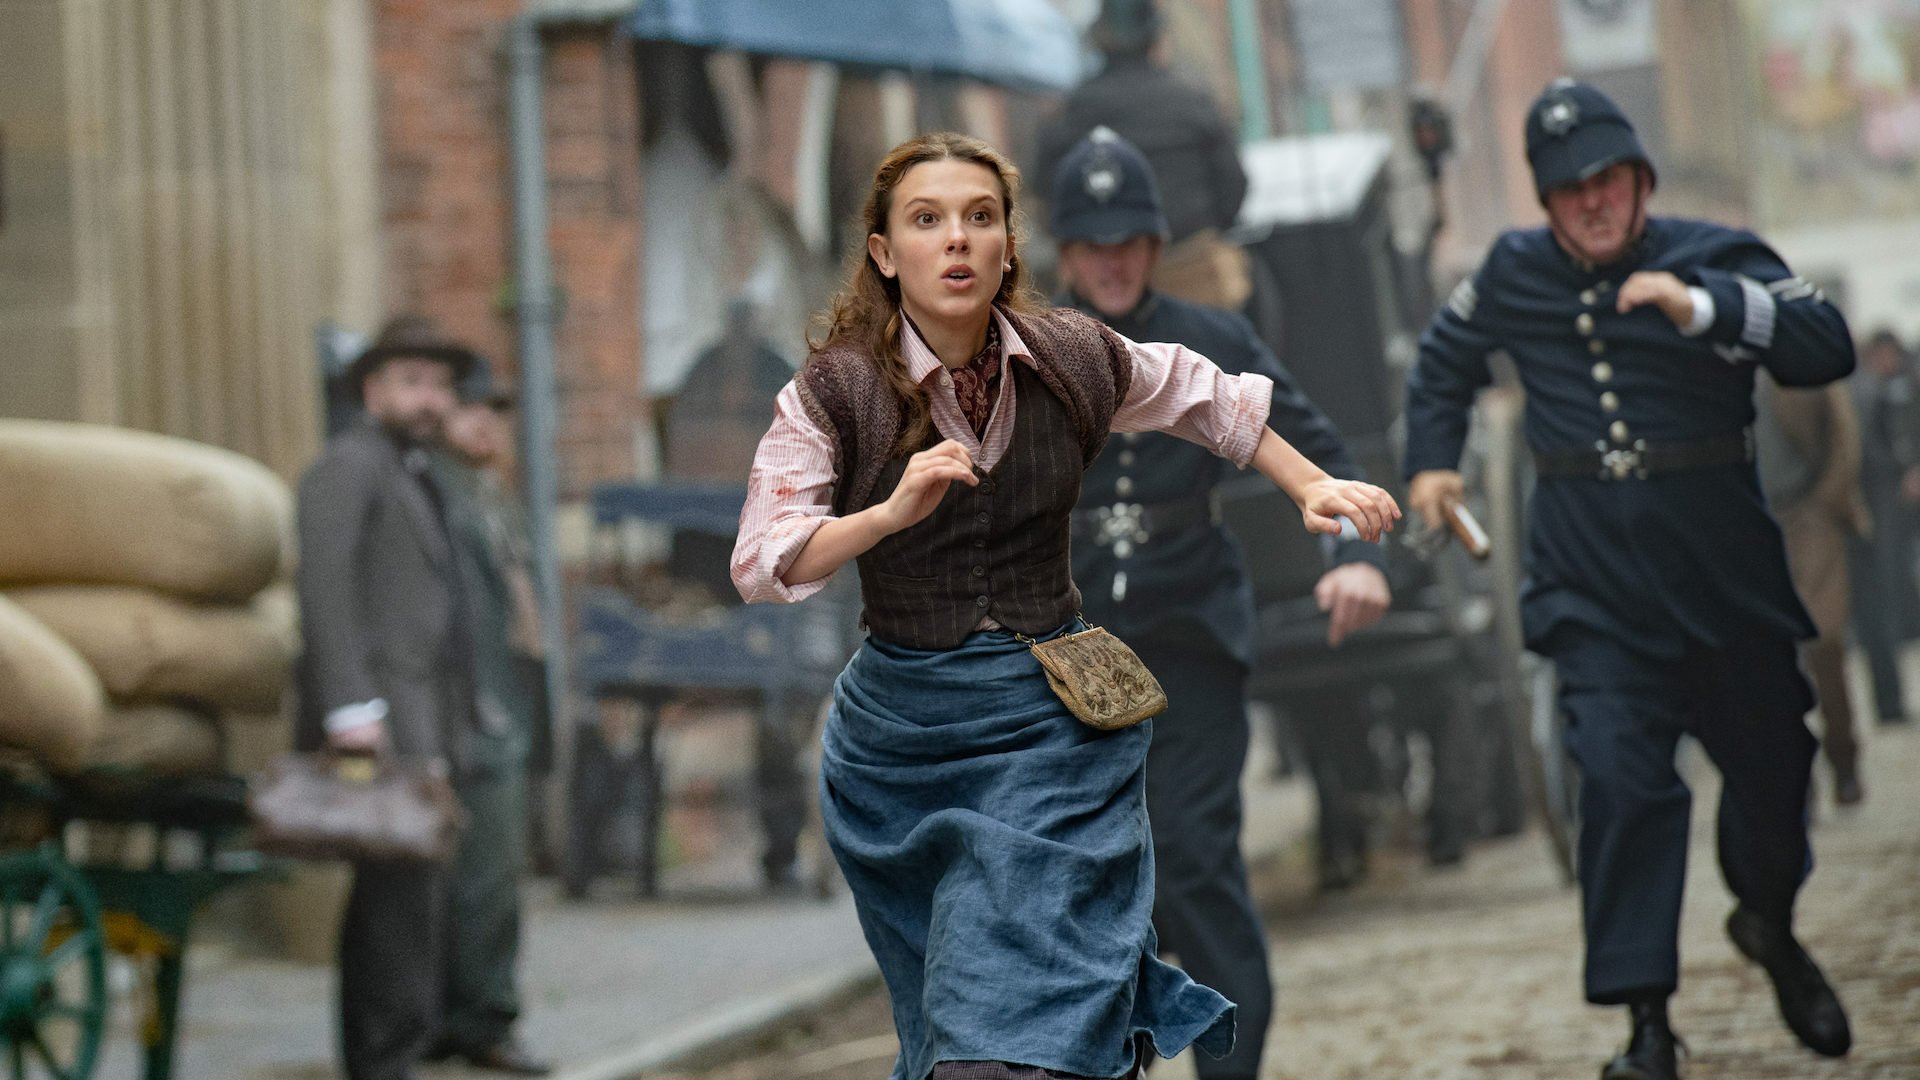 On a film set resembling a Victorian street in London, a young woman runs from the police.